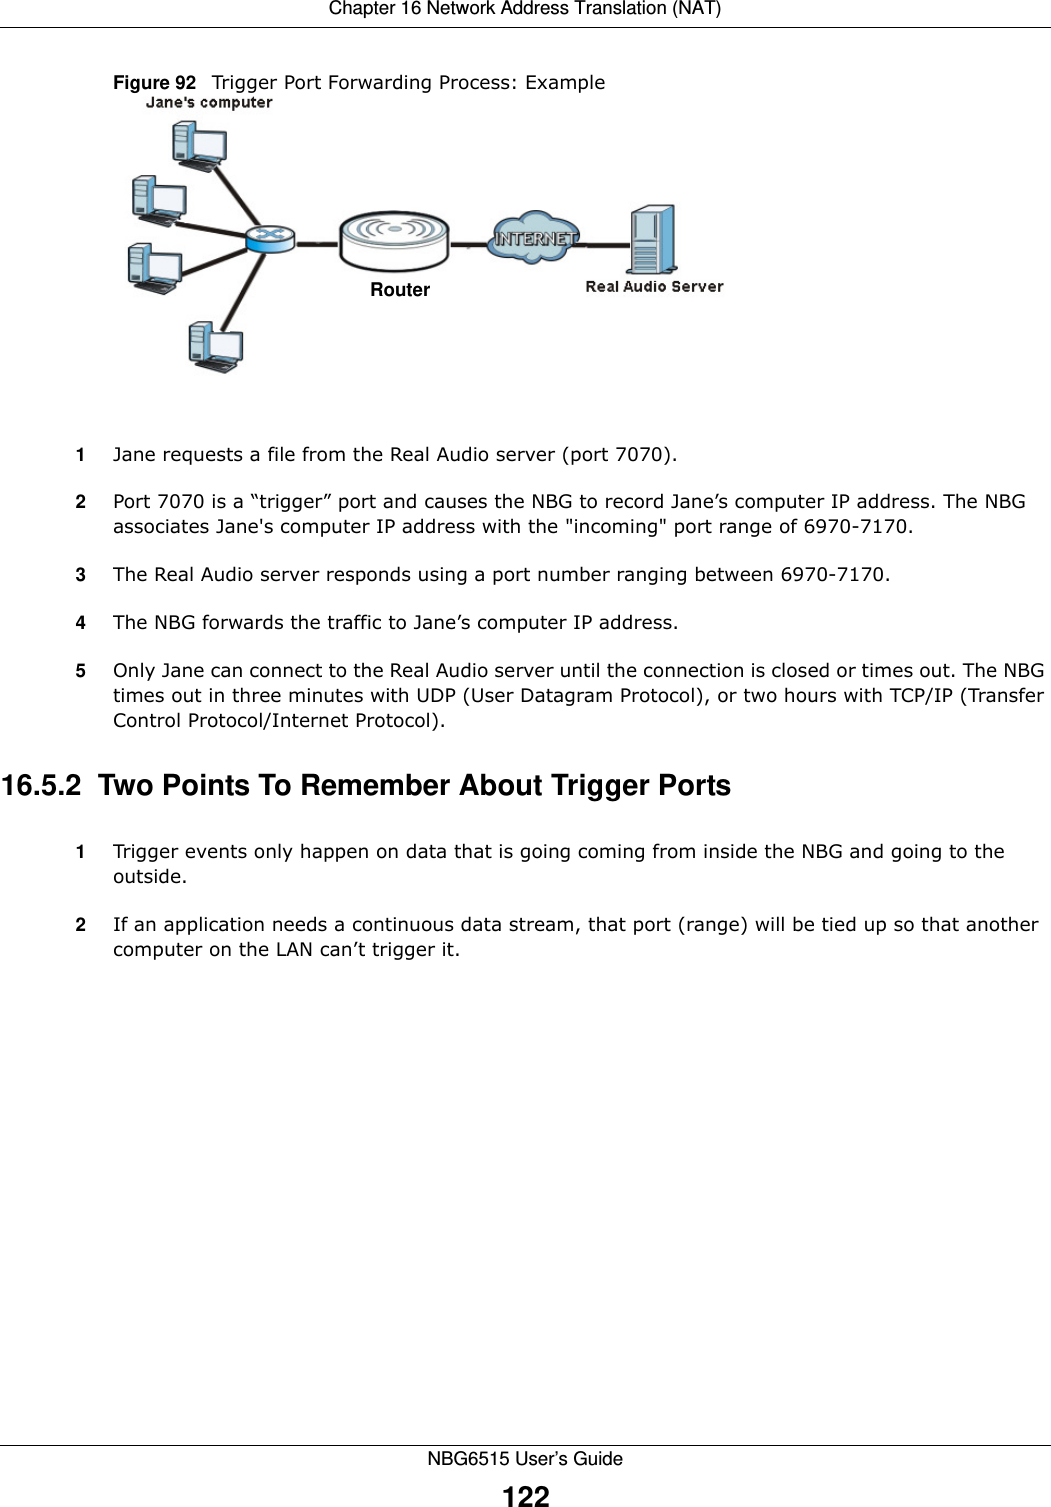 Chapter 16 Network Address Translation (NAT)NBG6515 User’s Guide122Figure 92   Trigger Port Forwarding Process: Example1Jane requests a file from the Real Audio server (port 7070).2Port 7070 is a “trigger” port and causes the NBG to record Jane’s computer IP address. The NBG associates Jane&apos;s computer IP address with the &quot;incoming&quot; port range of 6970-7170.3The Real Audio server responds using a port number ranging between 6970-7170.4The NBG forwards the traffic to Jane’s computer IP address. 5Only Jane can connect to the Real Audio server until the connection is closed or times out. The NBG times out in three minutes with UDP (User Datagram Protocol), or two hours with TCP/IP (Transfer Control Protocol/Internet Protocol). 16.5.2  Two Points To Remember About Trigger Ports1Trigger events only happen on data that is going coming from inside the NBG and going to the outside.2If an application needs a continuous data stream, that port (range) will be tied up so that another computer on the LAN can’t trigger it.RouterRouter